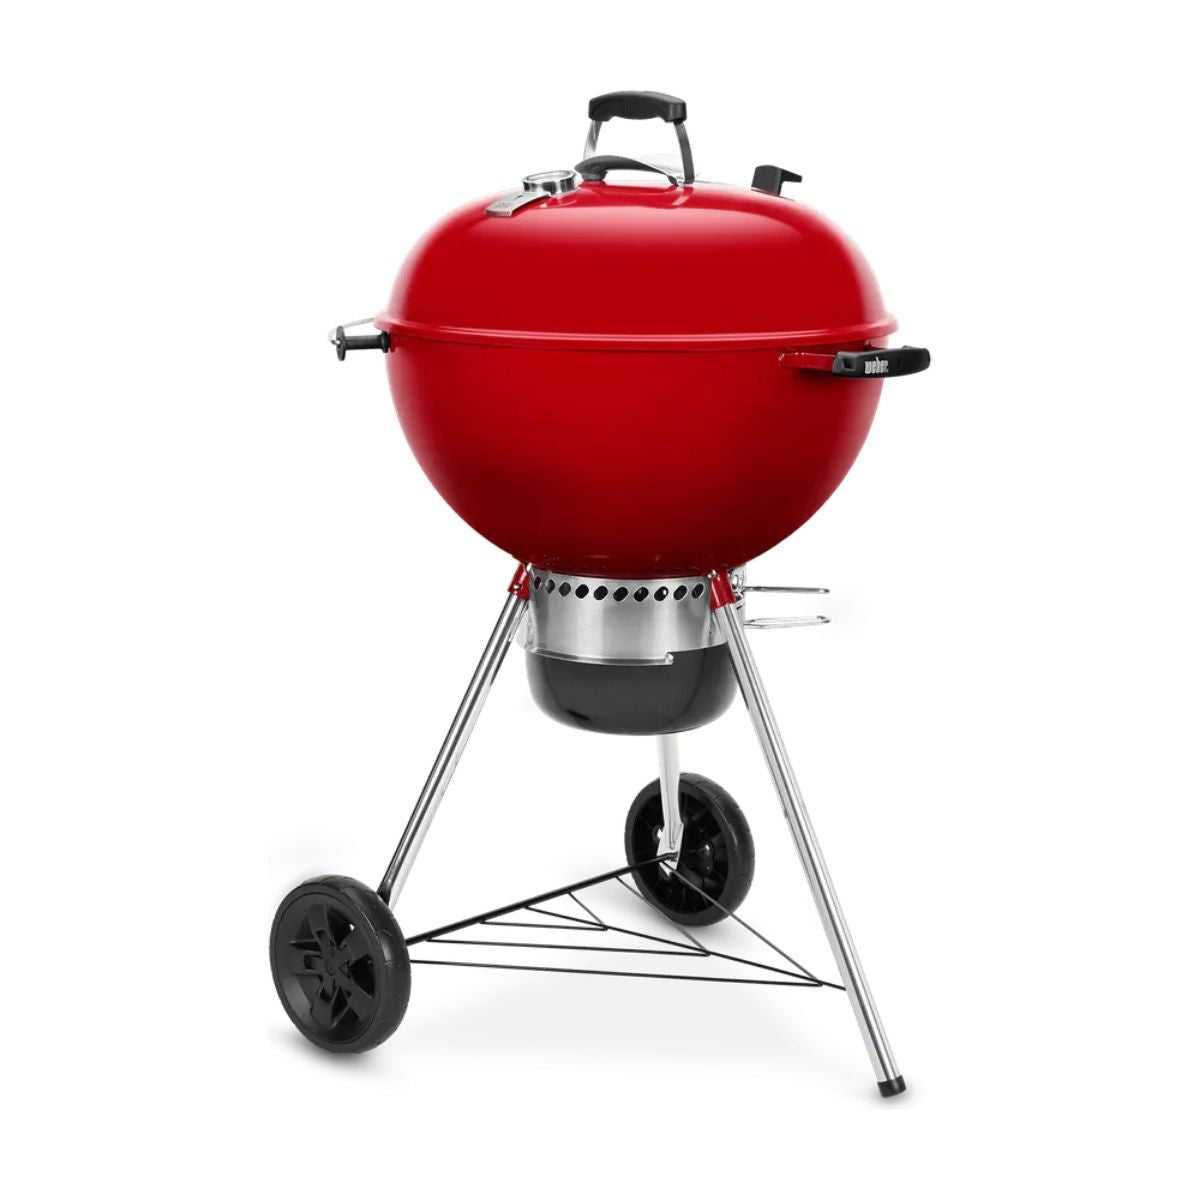 Weber Original Kettle Premium Limited Edition Charcoal Grill 57cm (Red)